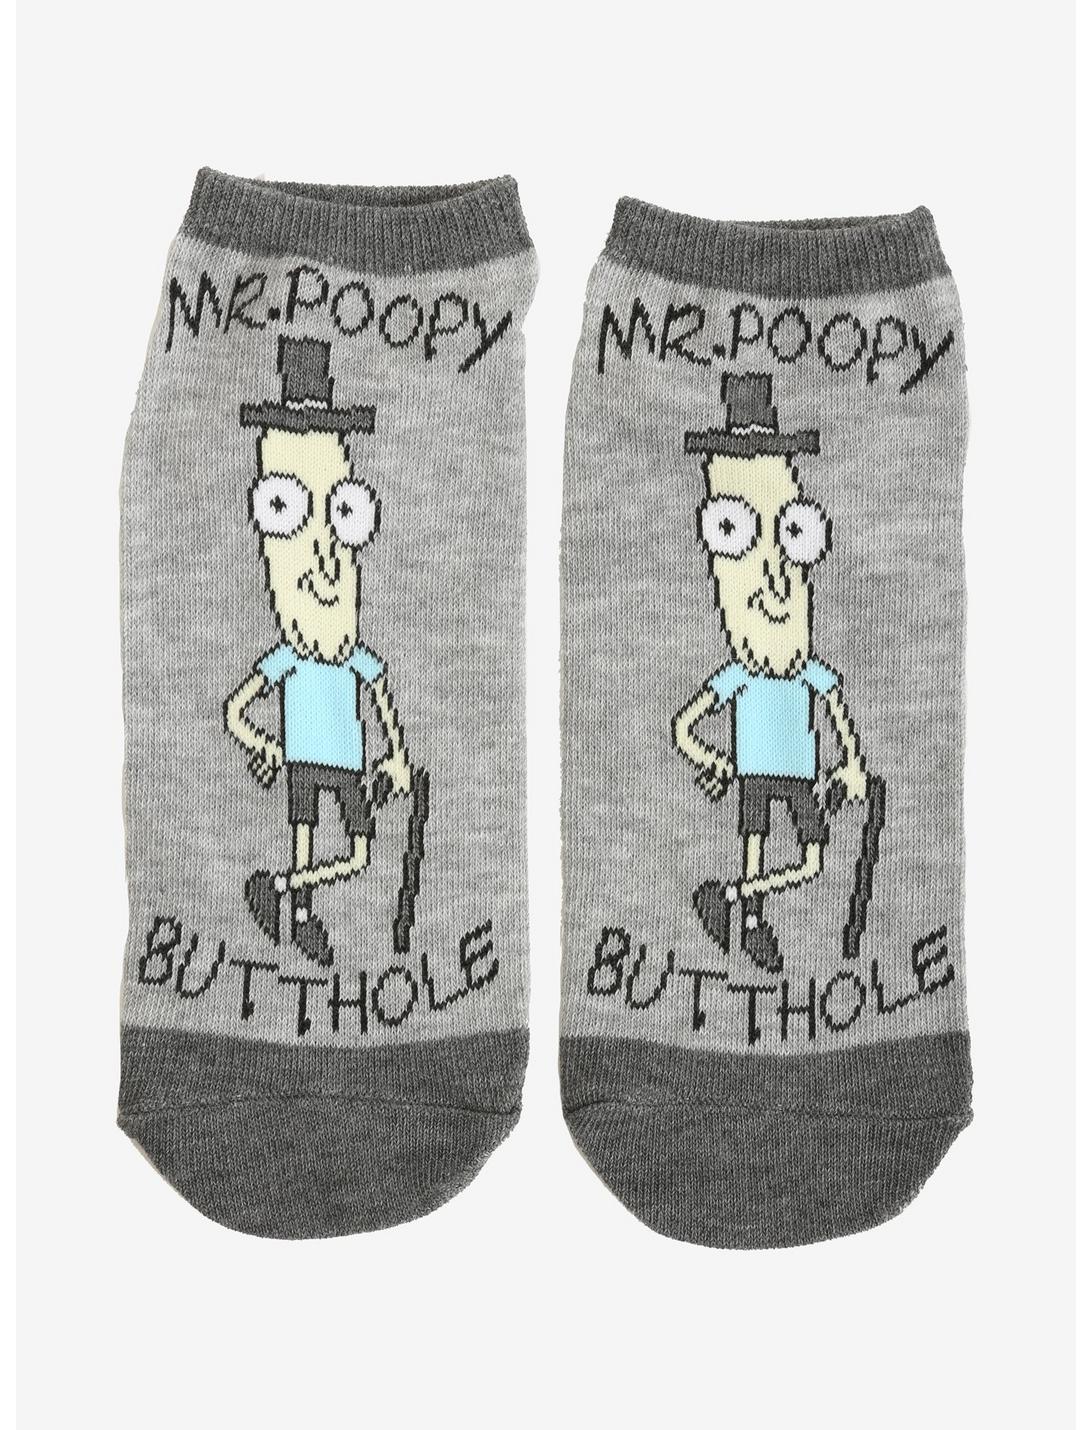 Rick And Morty Mr. Poopy Butthole No-Show Socks, , hi-res